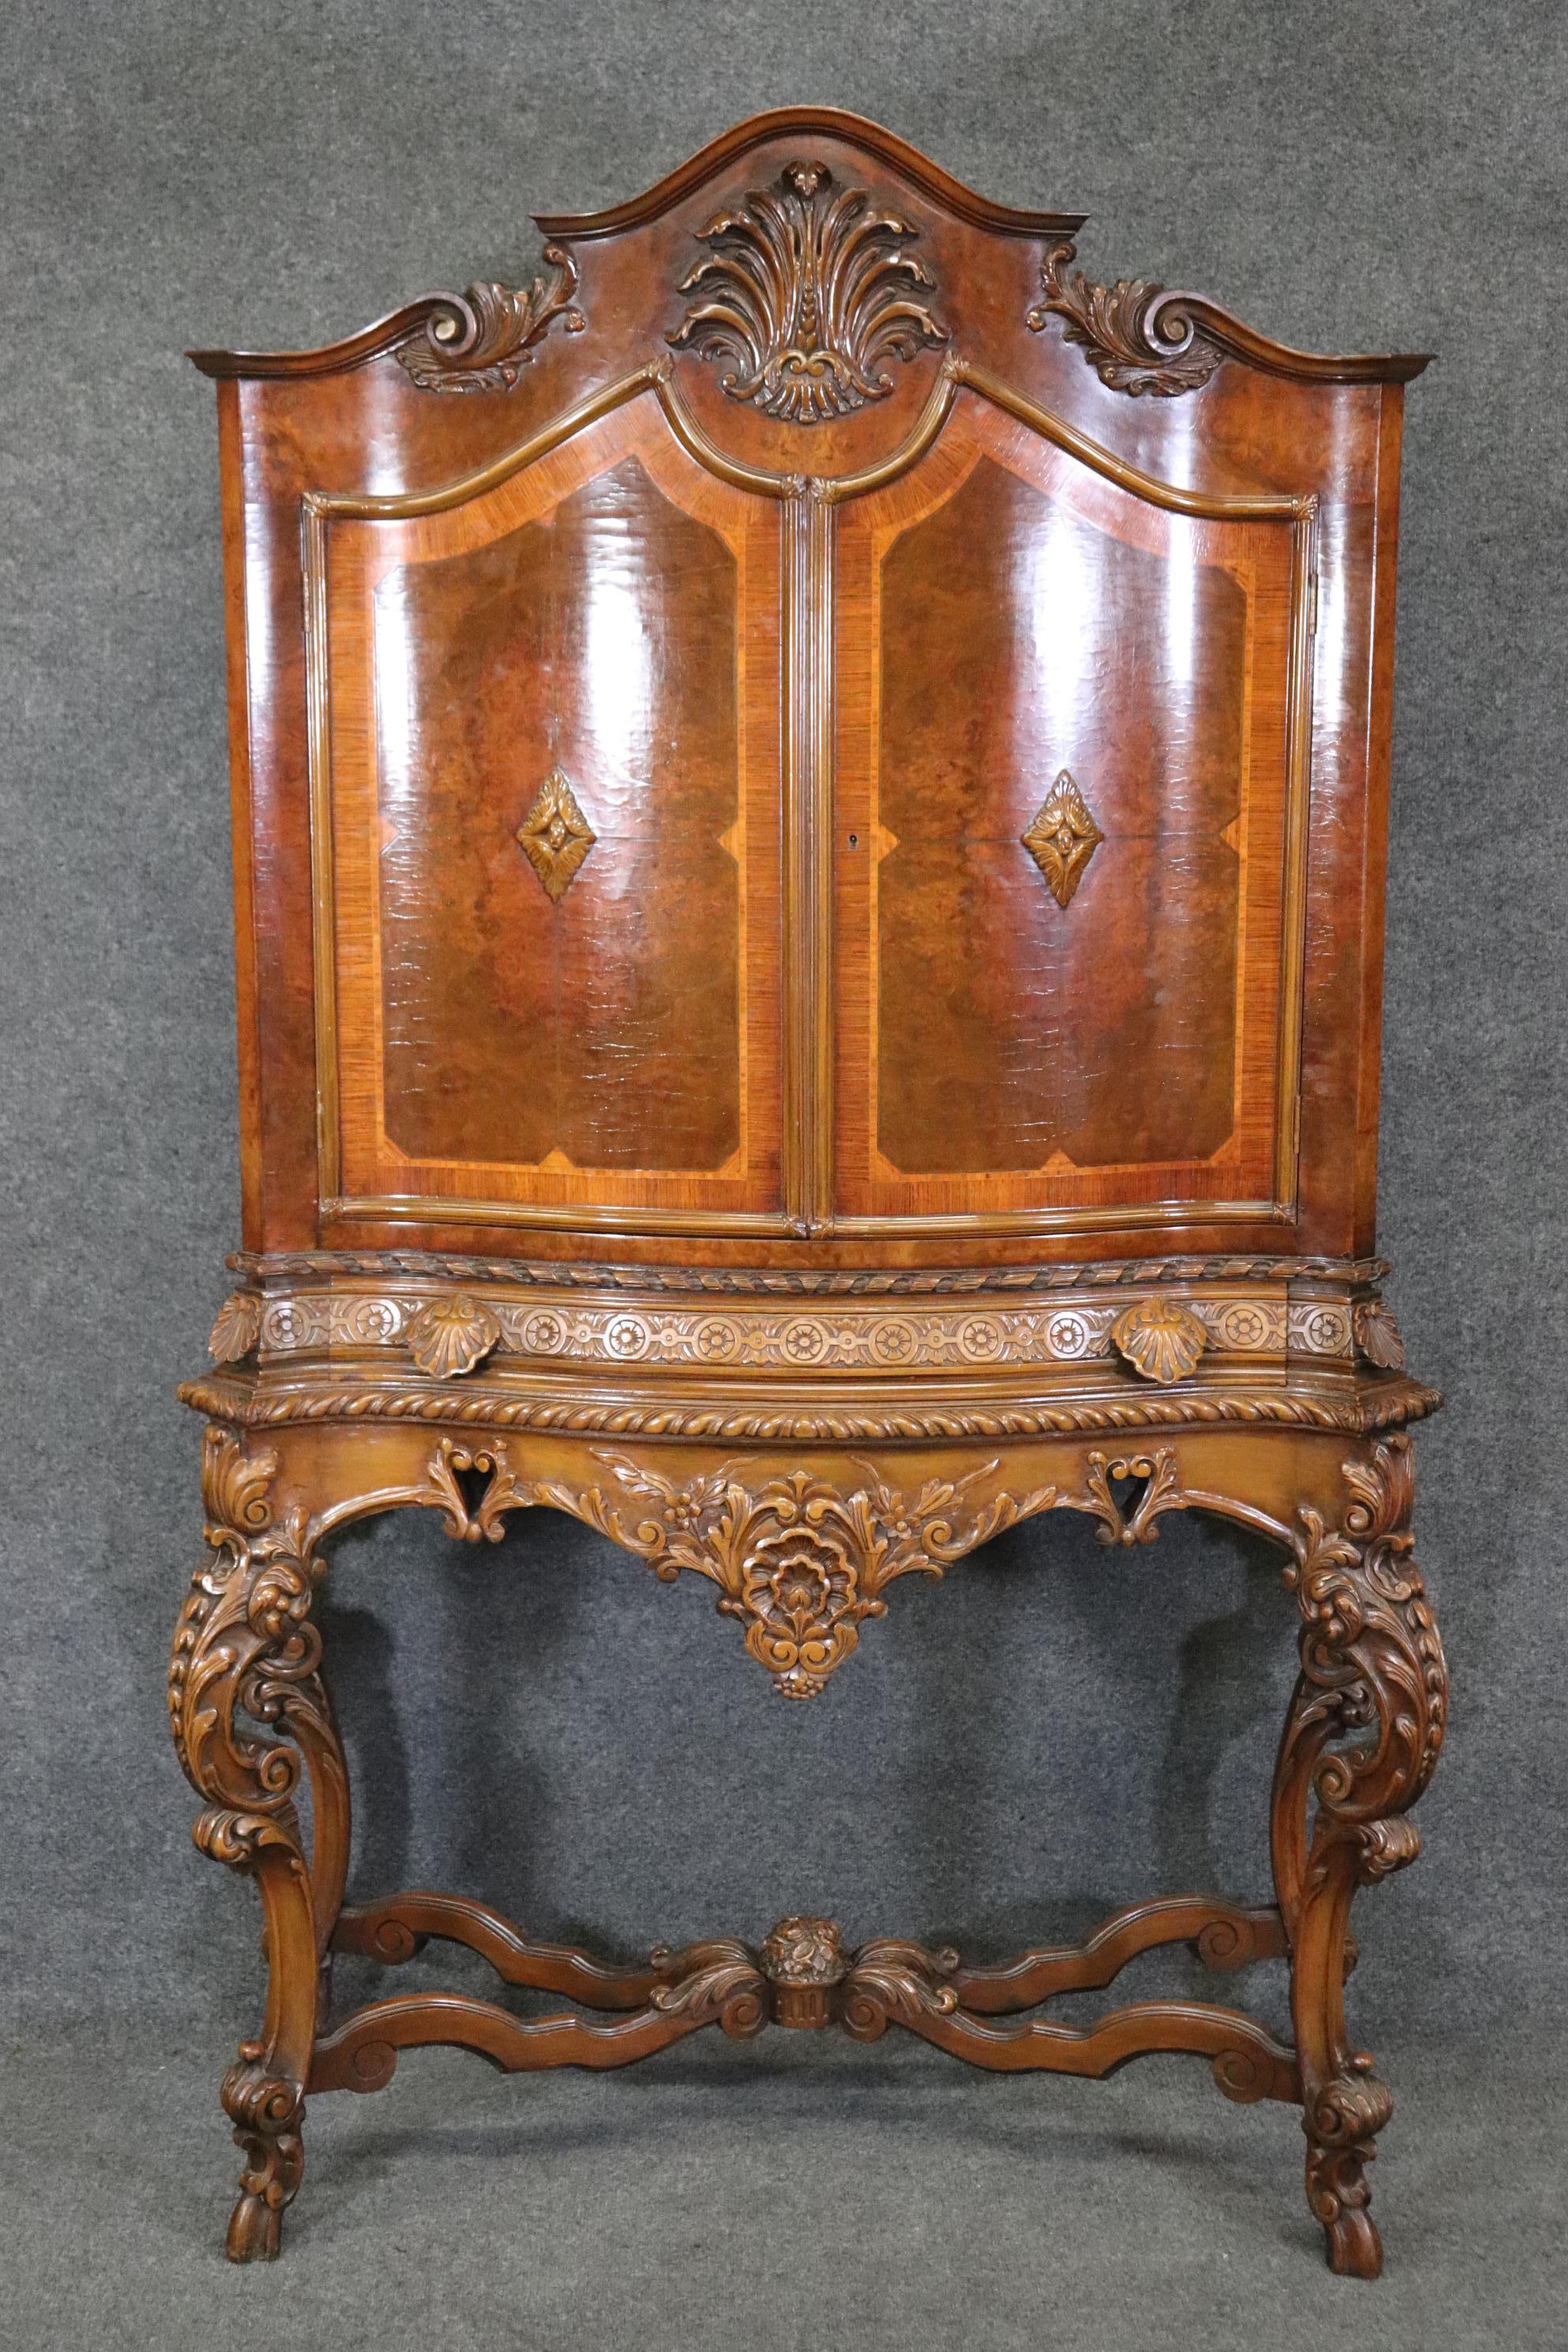 This is a beautifully designed cabinet in the Louis XV cabinet in solid and inlaid walnut. The cabinet has its orginal finish and will show craquelure in the finish of the doors and this is to be expected. The cabinet measures 75.25 tall x 50 wide x